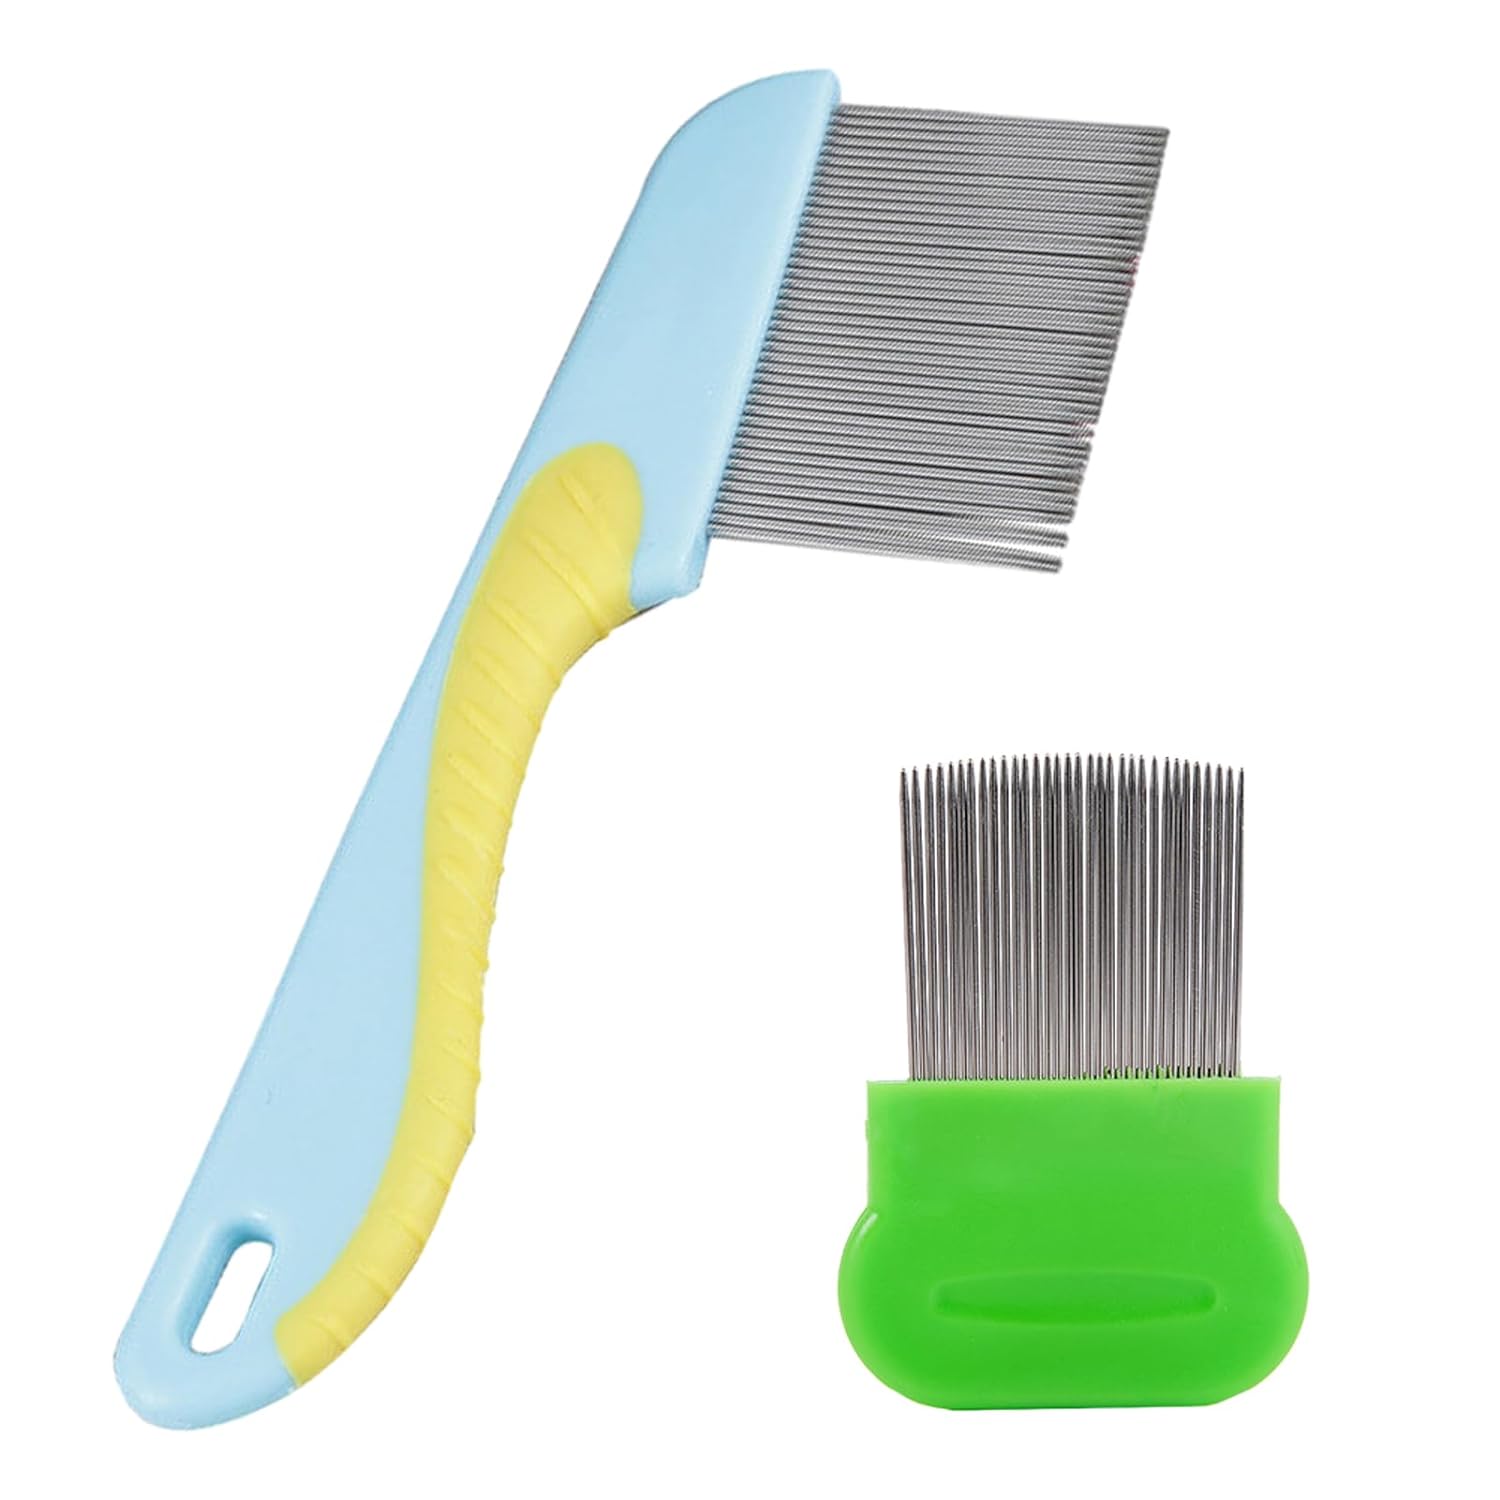 Pack of 2 Lice Combs, Lice Comb, Nit Comb, Flea Comb, Lice Comb, Lice Comb and Head Leaf Made of Stainless Steel for Care and Removal of Dandruff Or Lice Lice (Yellow, Blue + Green)